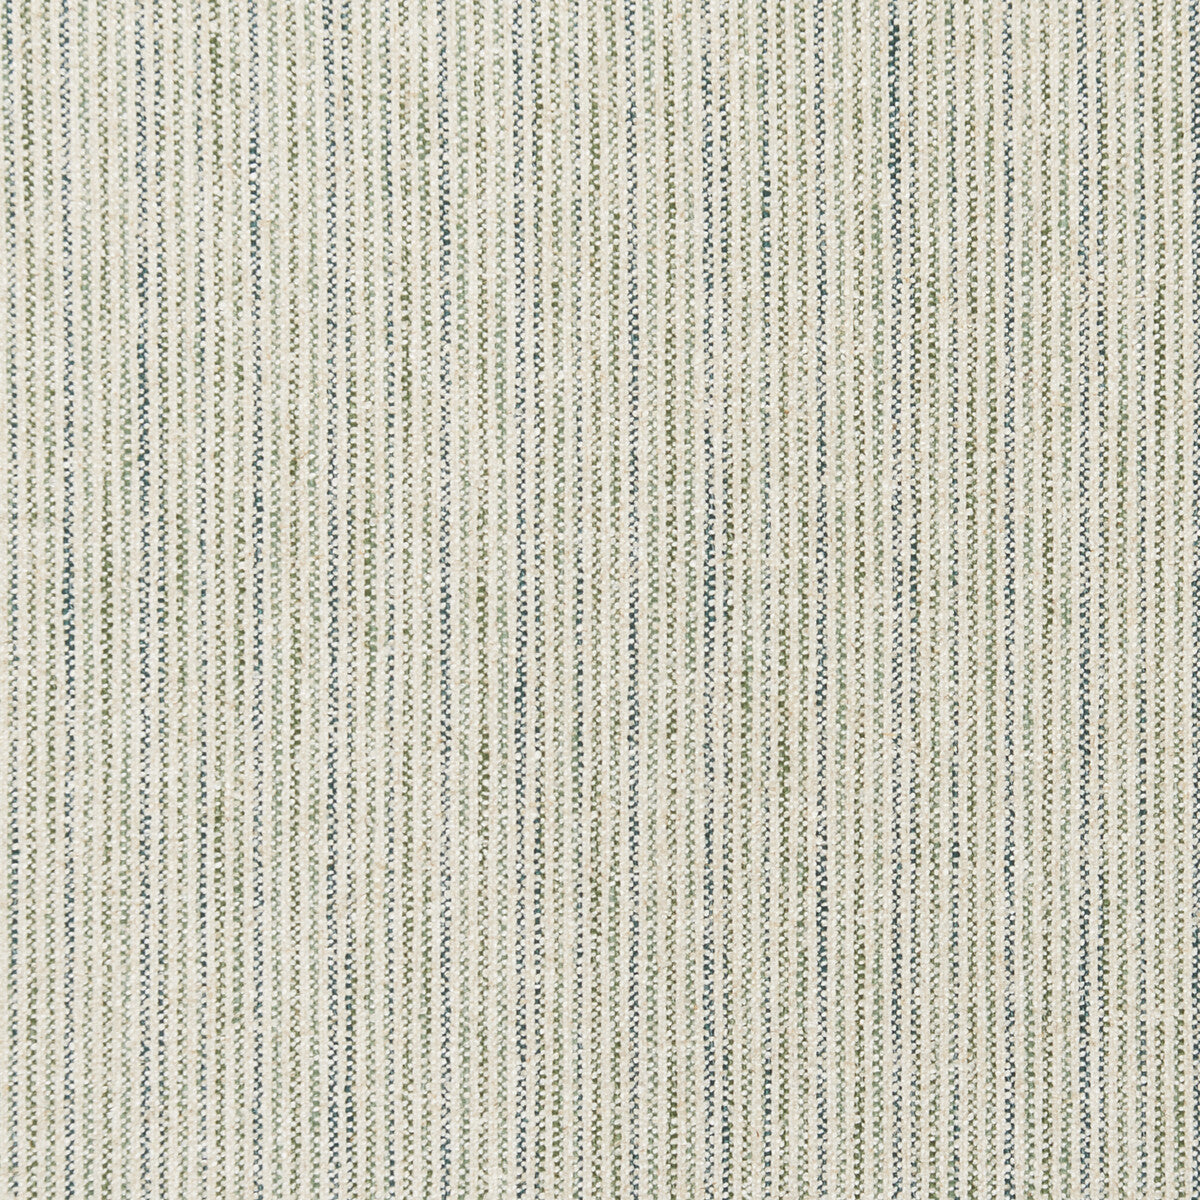 Kravet Basics fabric in 37263-353 color - pattern 37263.353.0 - by Kravet Basics in the Bungalow Chic II collection